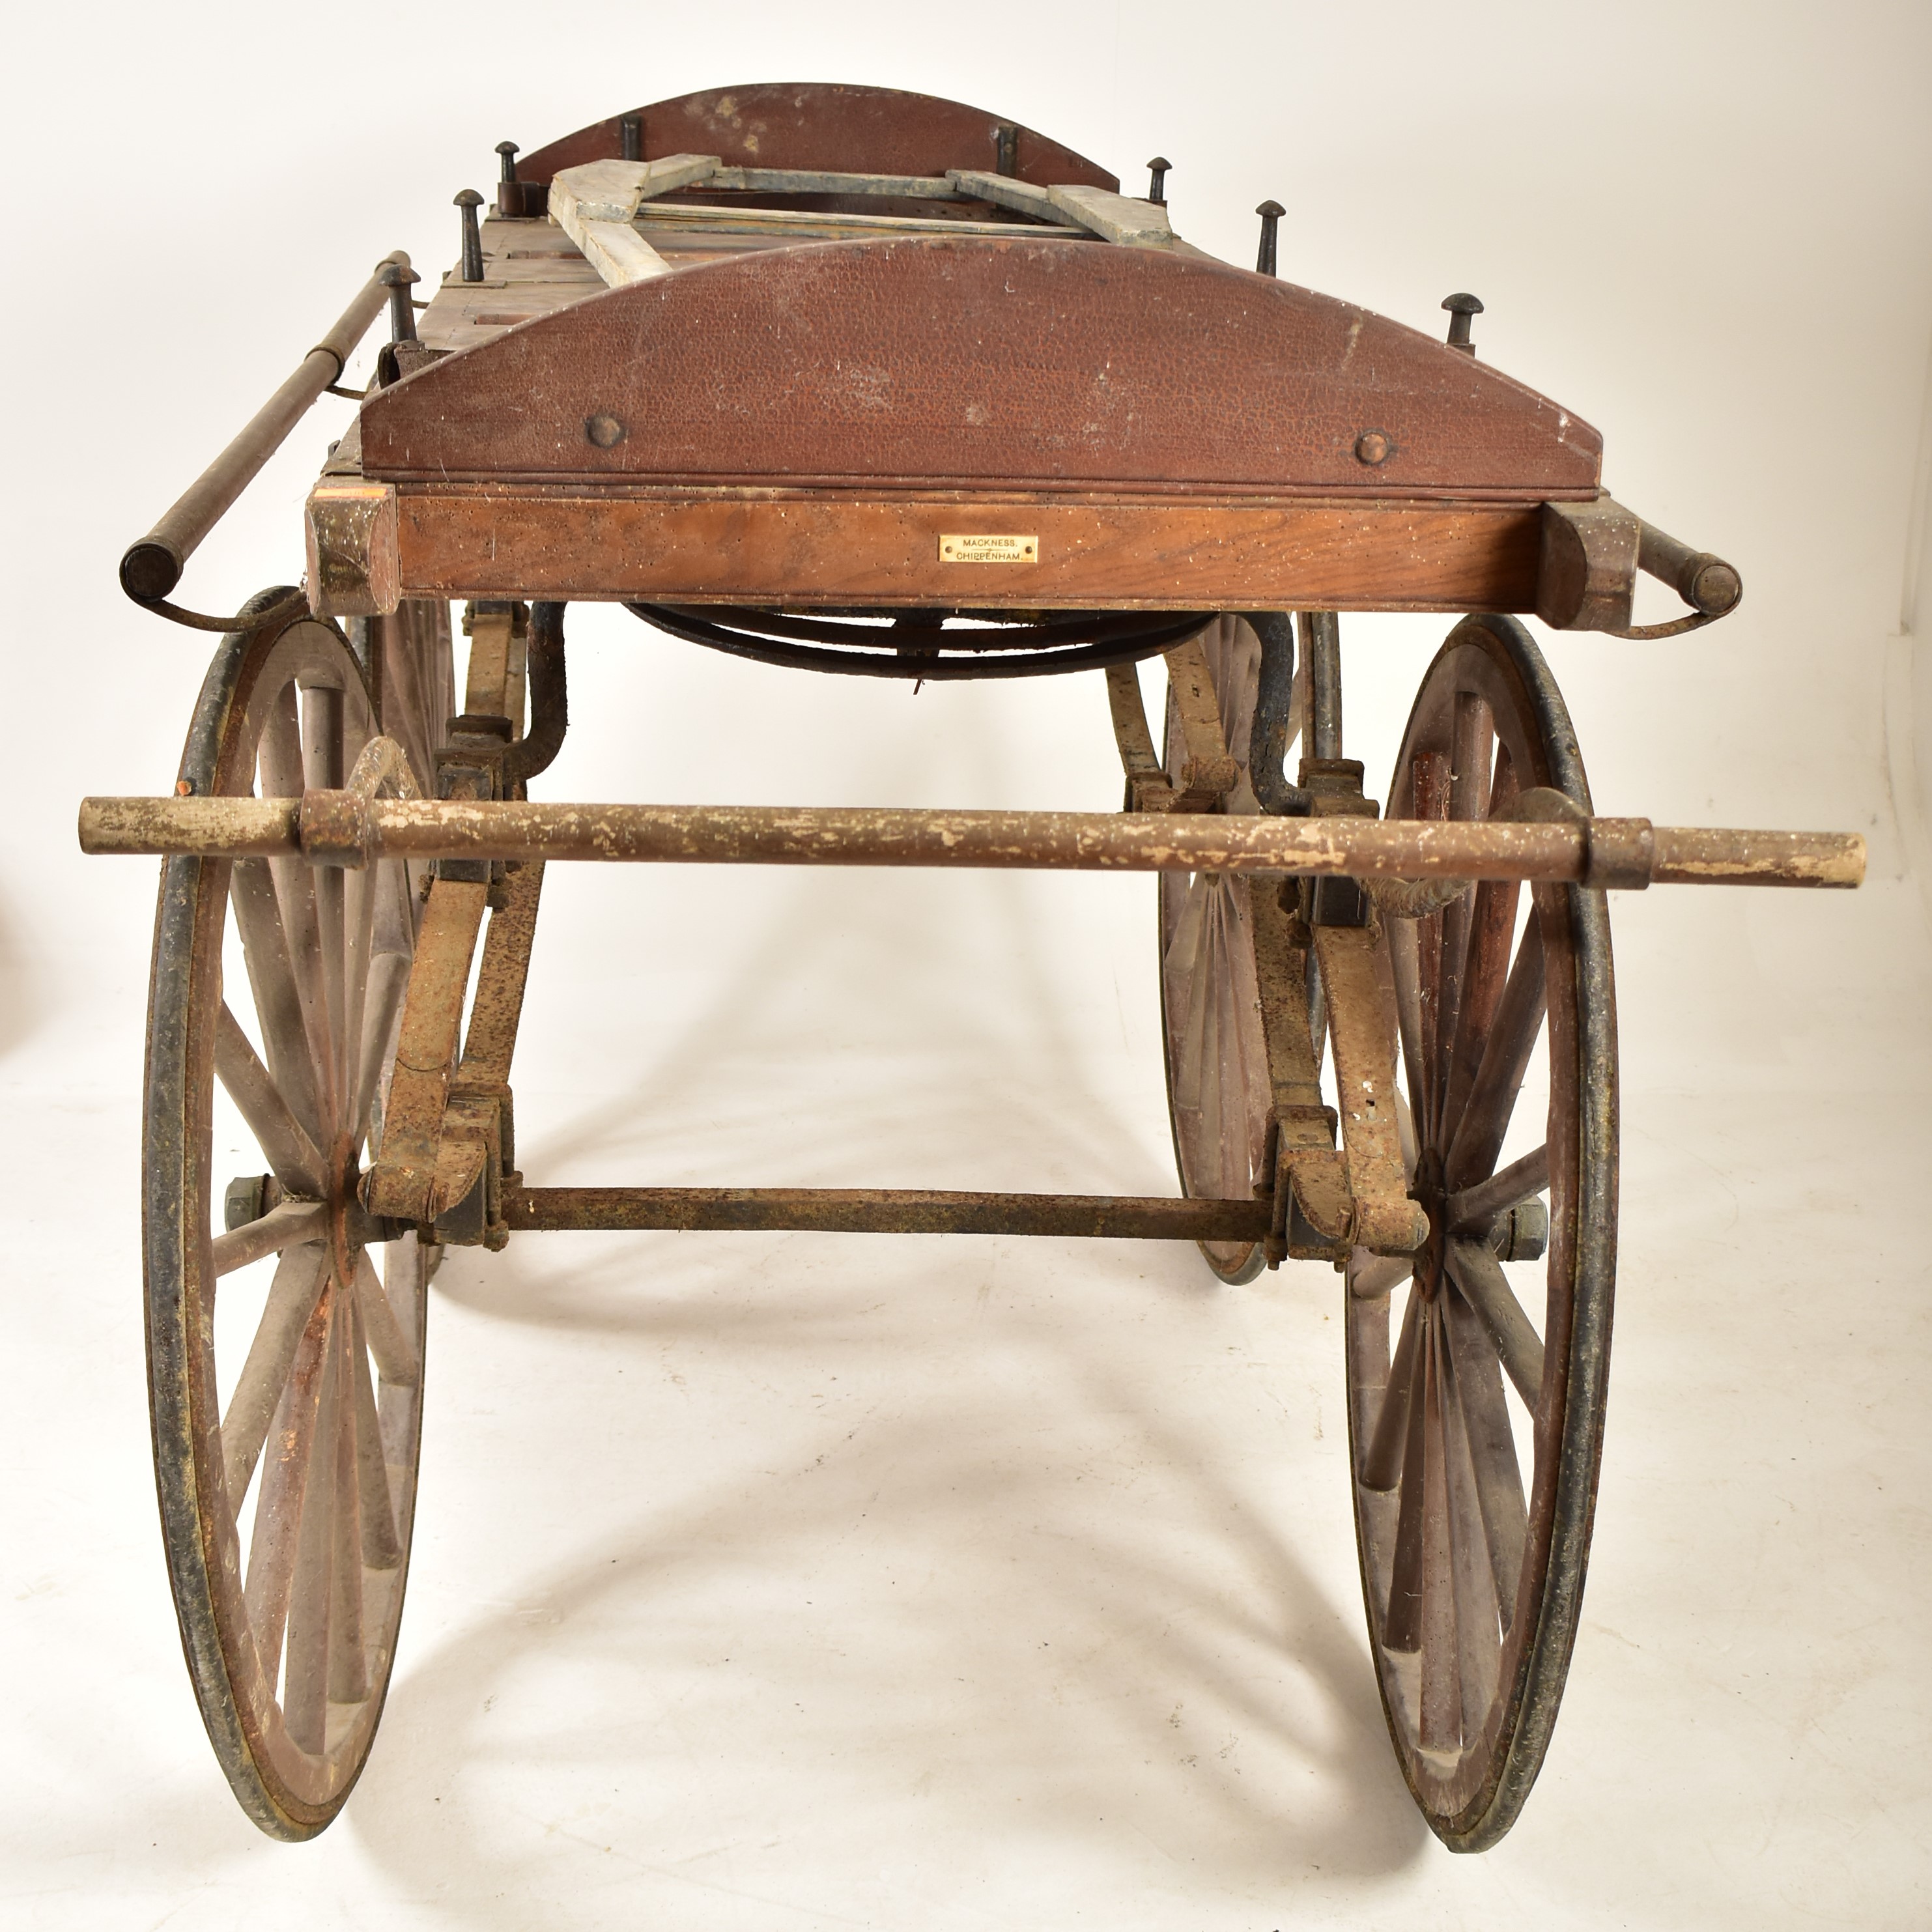 LATE 19TH CENTURY MACKNESS OF CHIPPENHAM BIER CARRIAGE - Image 5 of 5